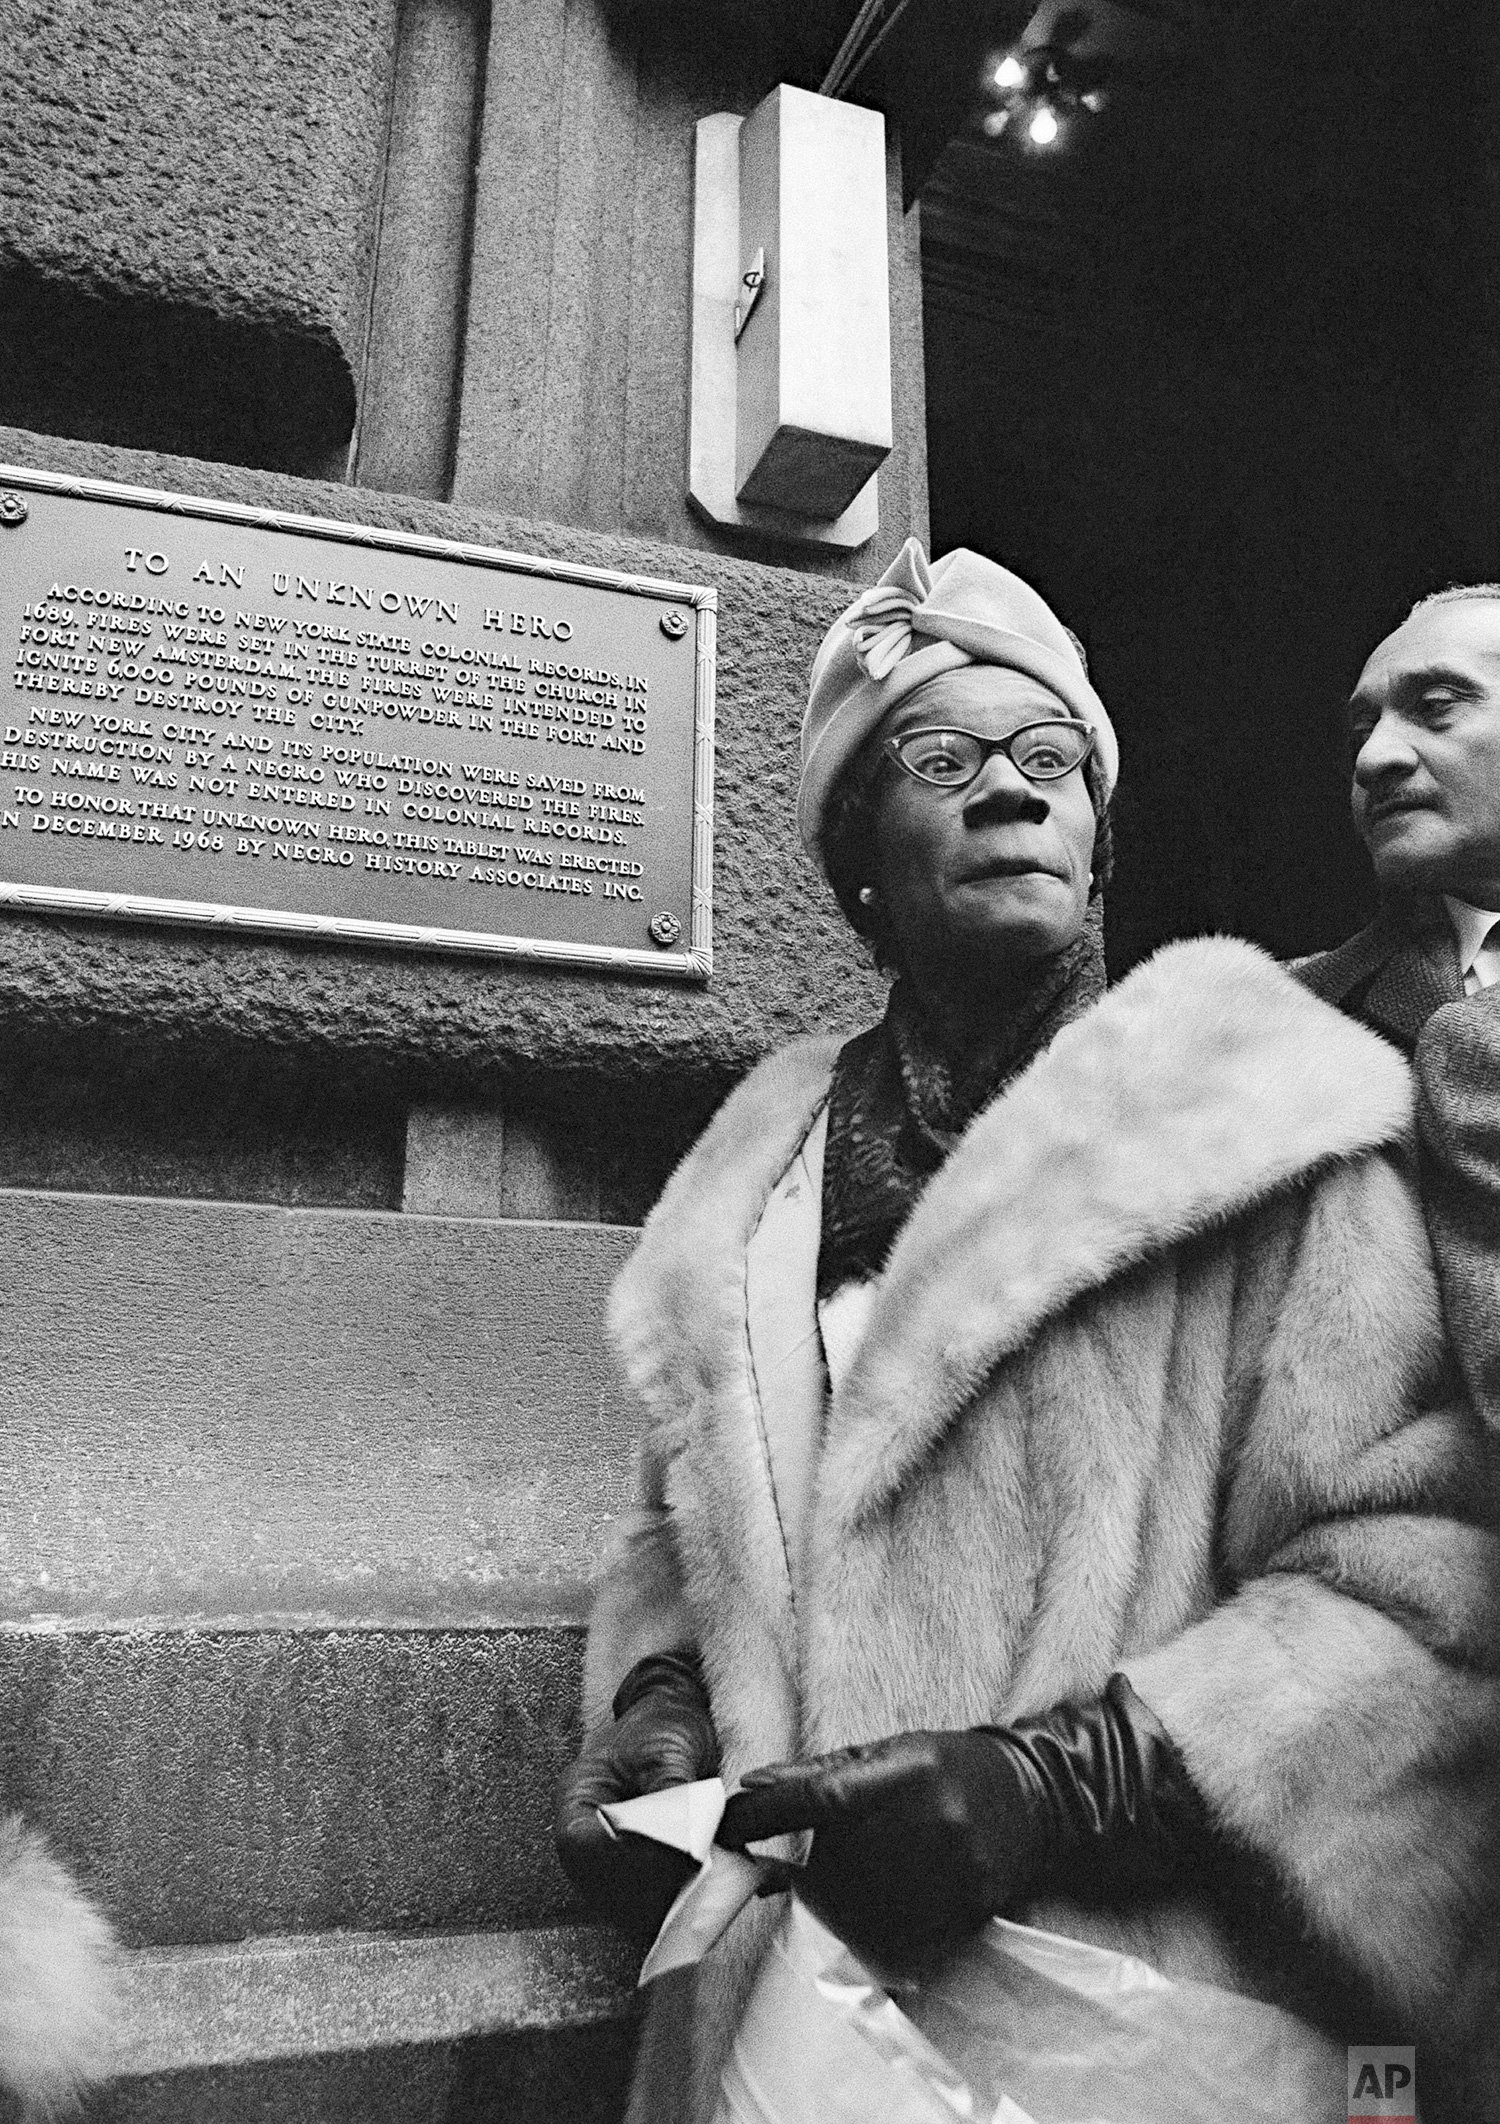  Brooklyn’s Congresswoman-elect Shirley Chisholm unveils a plaque for an “Unknown Hero” at the U.S. Customs House in New York City, Dec. 19, 1968. The ceremony was organized by Negro History Associates, Inc., to commemorate a moment in the history of